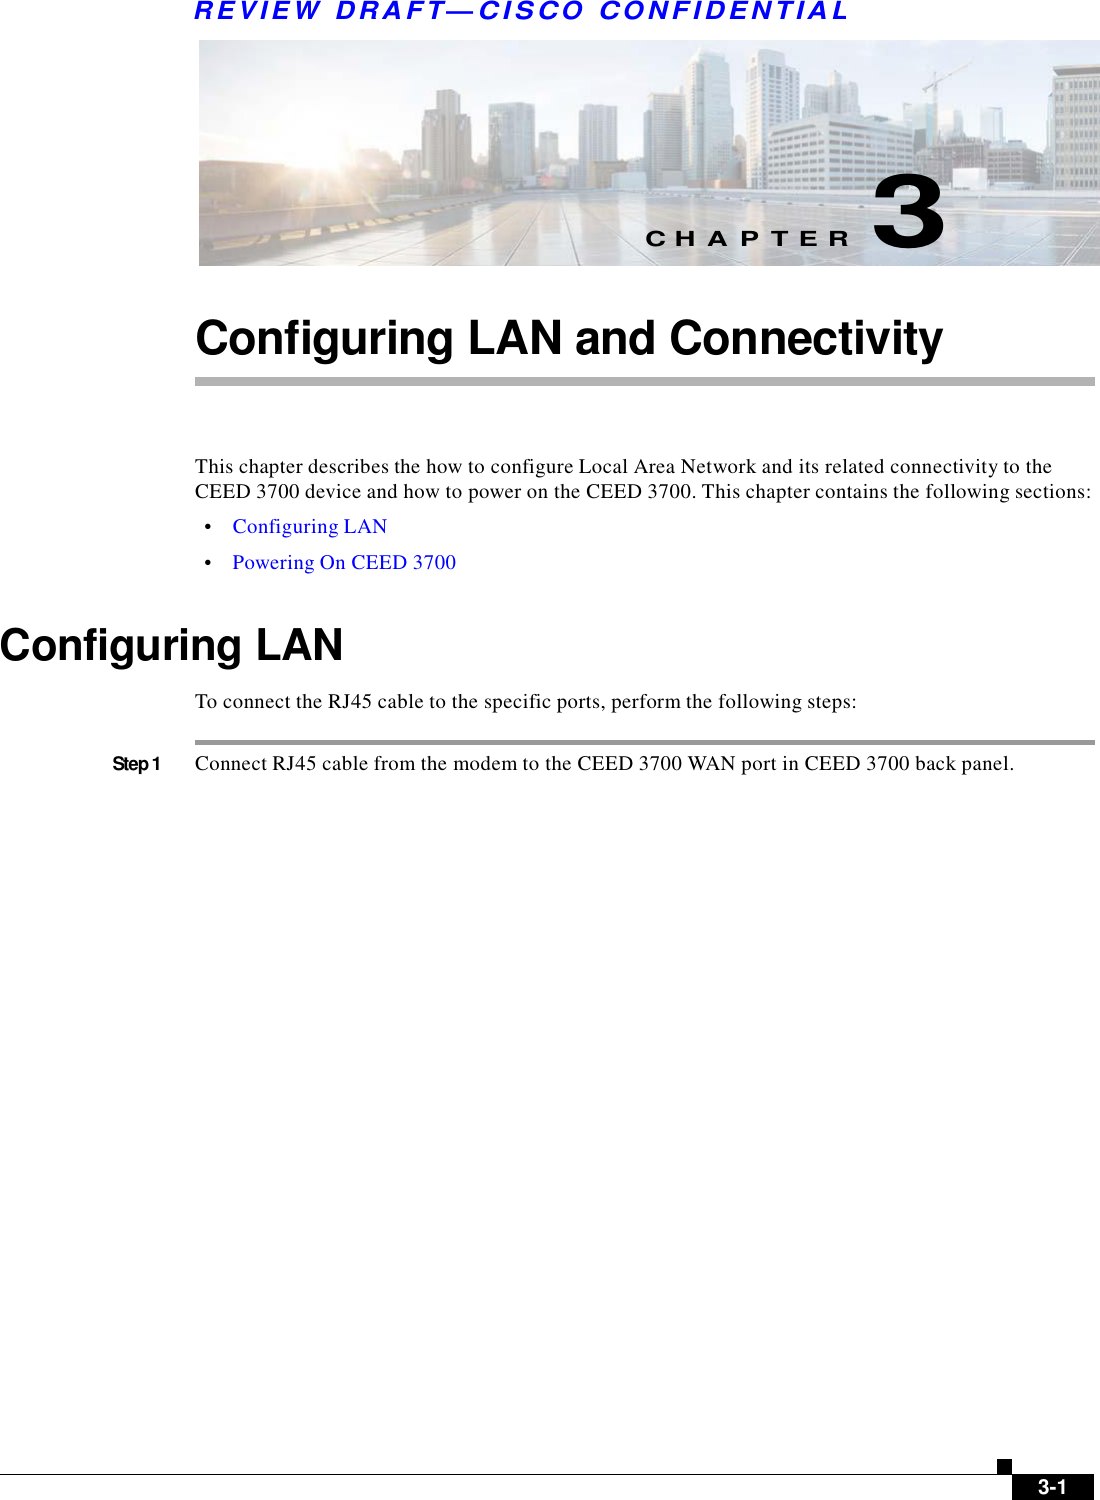 R E V IE W  DRAFT— CISC O  C O N F ID E NT IA L            C H A P T E R  3   Configuring LAN and Connectivity     This chapter describes the how to configure Local Area Network and its related connectivity to the CEED 3700 device and how to power on the CEED 3700. This chapter contains the following sections:  •    Configuring LAN  •    Powering On CEED 3700   Configuring LAN  To connect the RJ45 cable to the specific ports, perform the following steps:   Step 1  Connect RJ45 cable from the modem to the CEED 3700 WAN port in CEED 3700 back panel.                                      3-1 